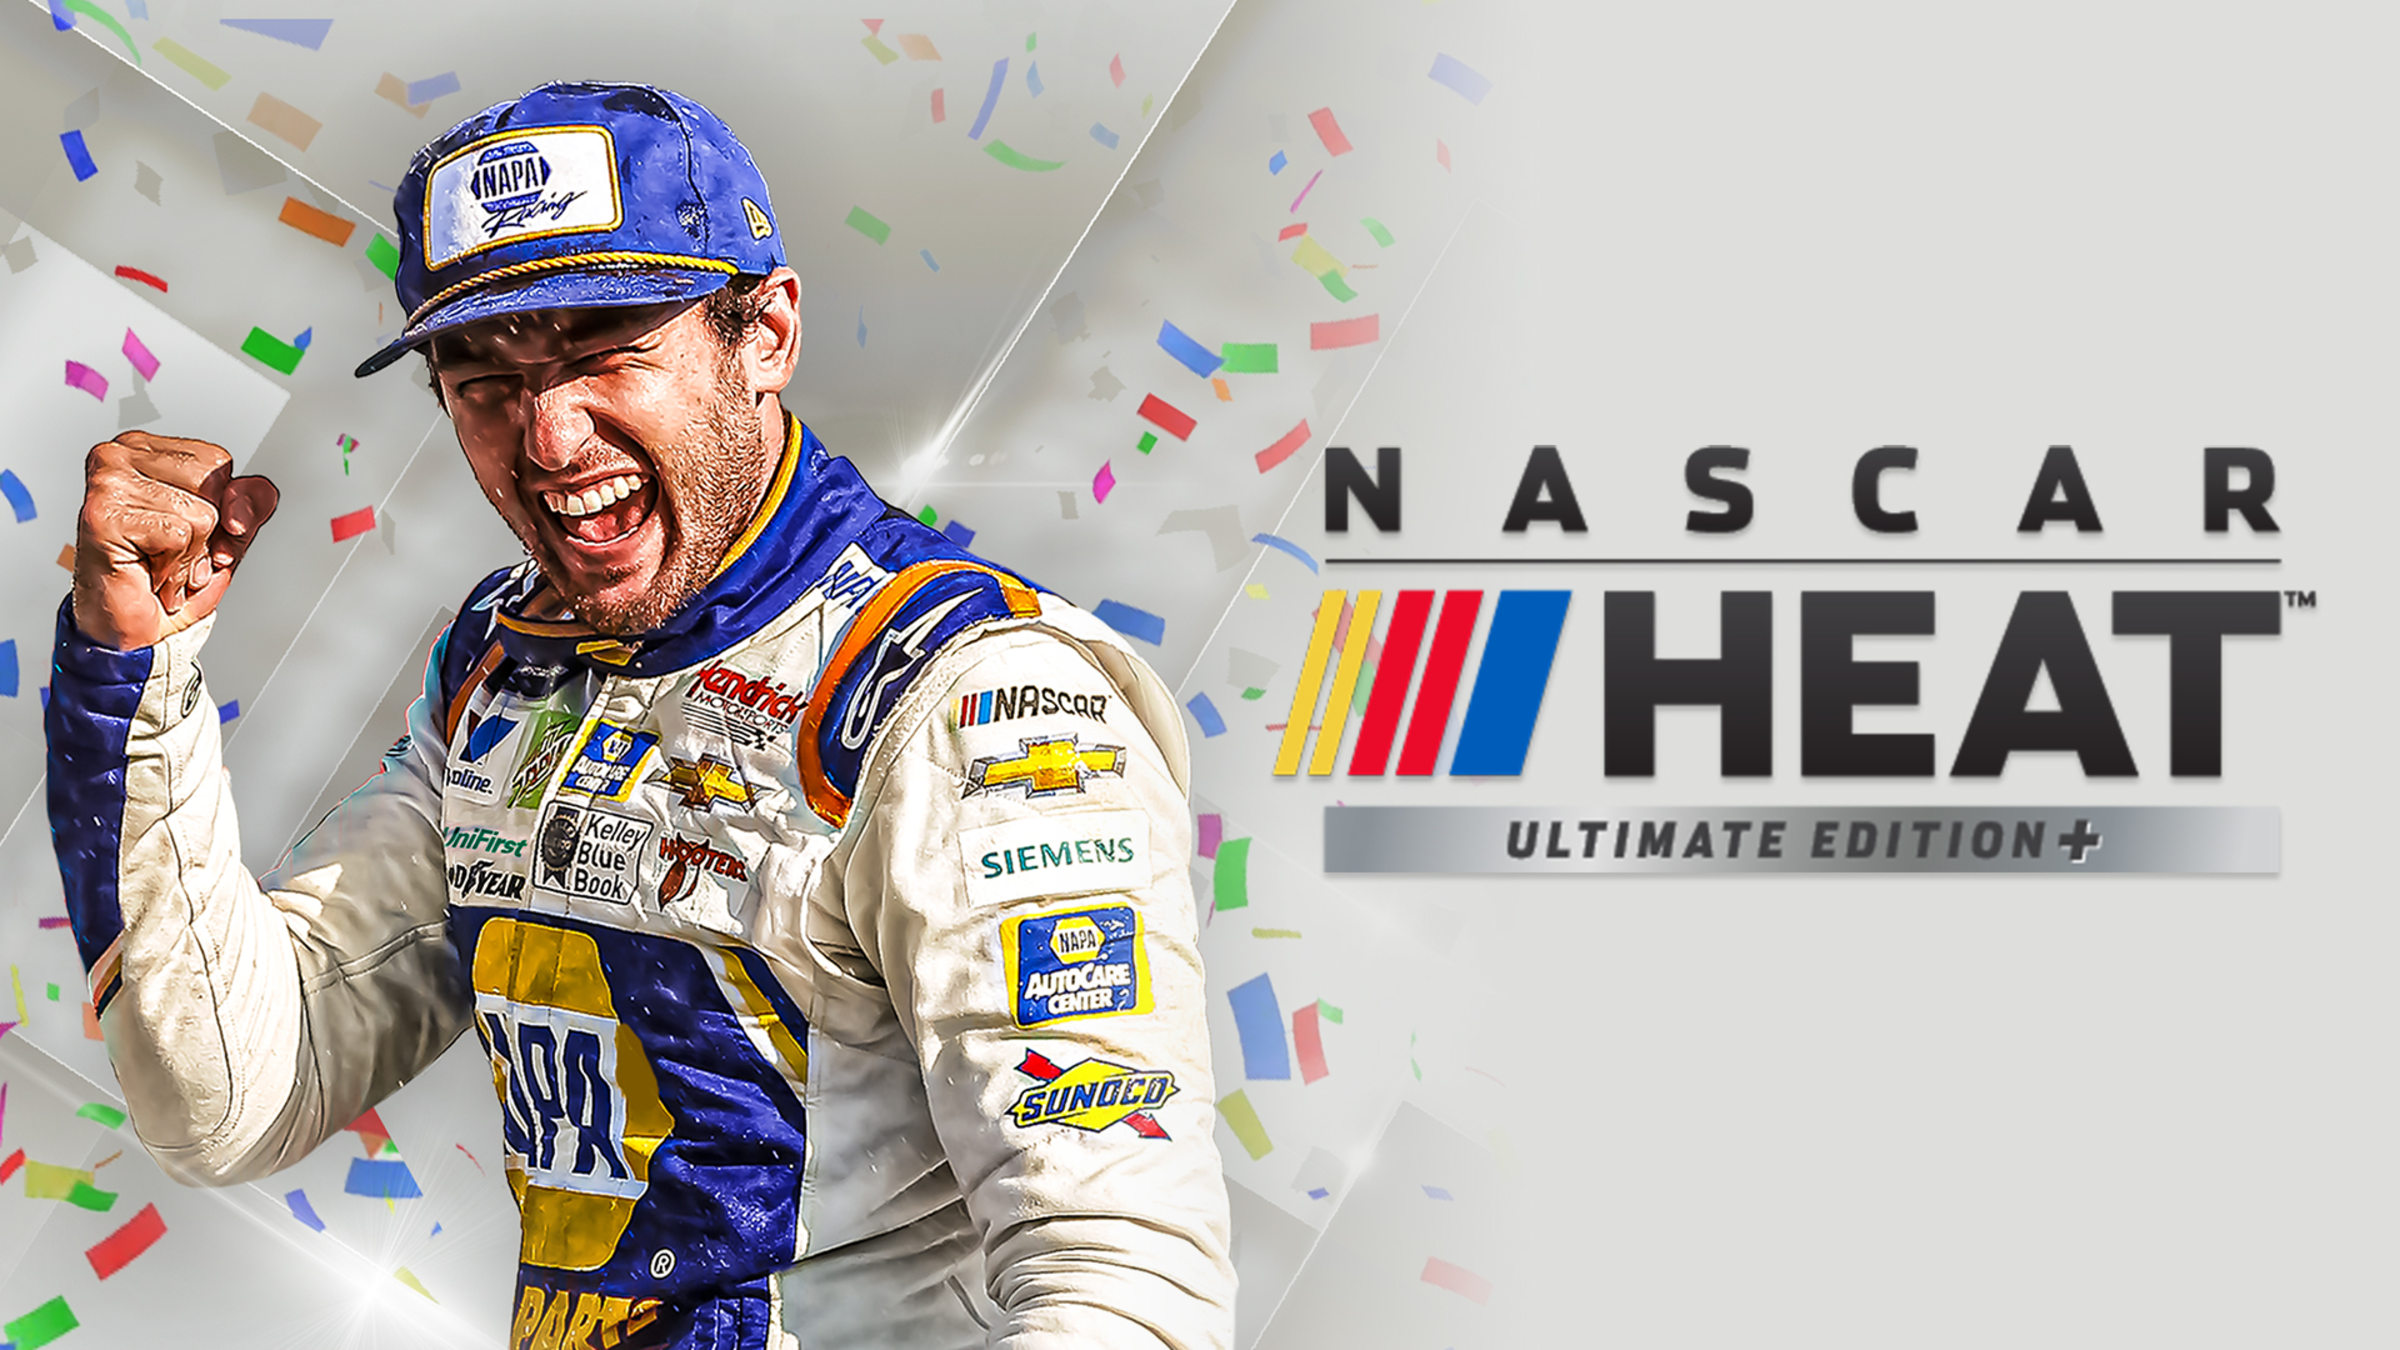 NASCAR Heat Ultimate Edition+ for Nintendo Switch